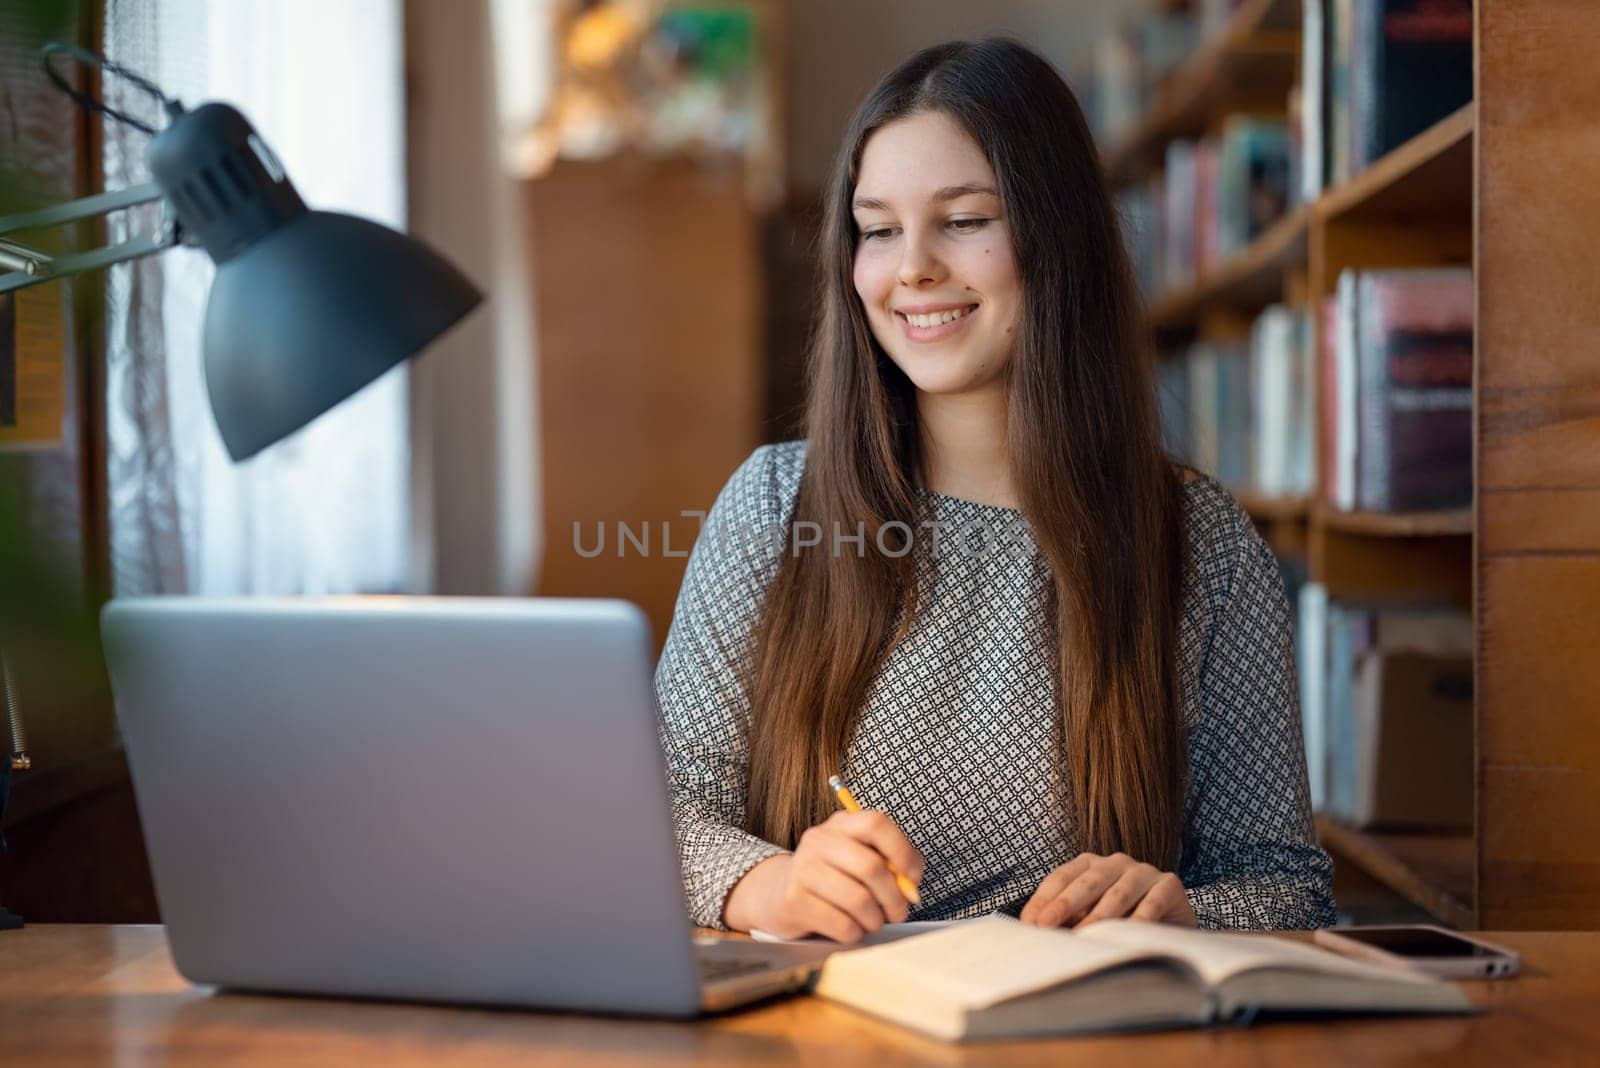 Cute young student girl sitting at a table with laptop in front of her, writing something in the notebook by VitaliiPetrushenko